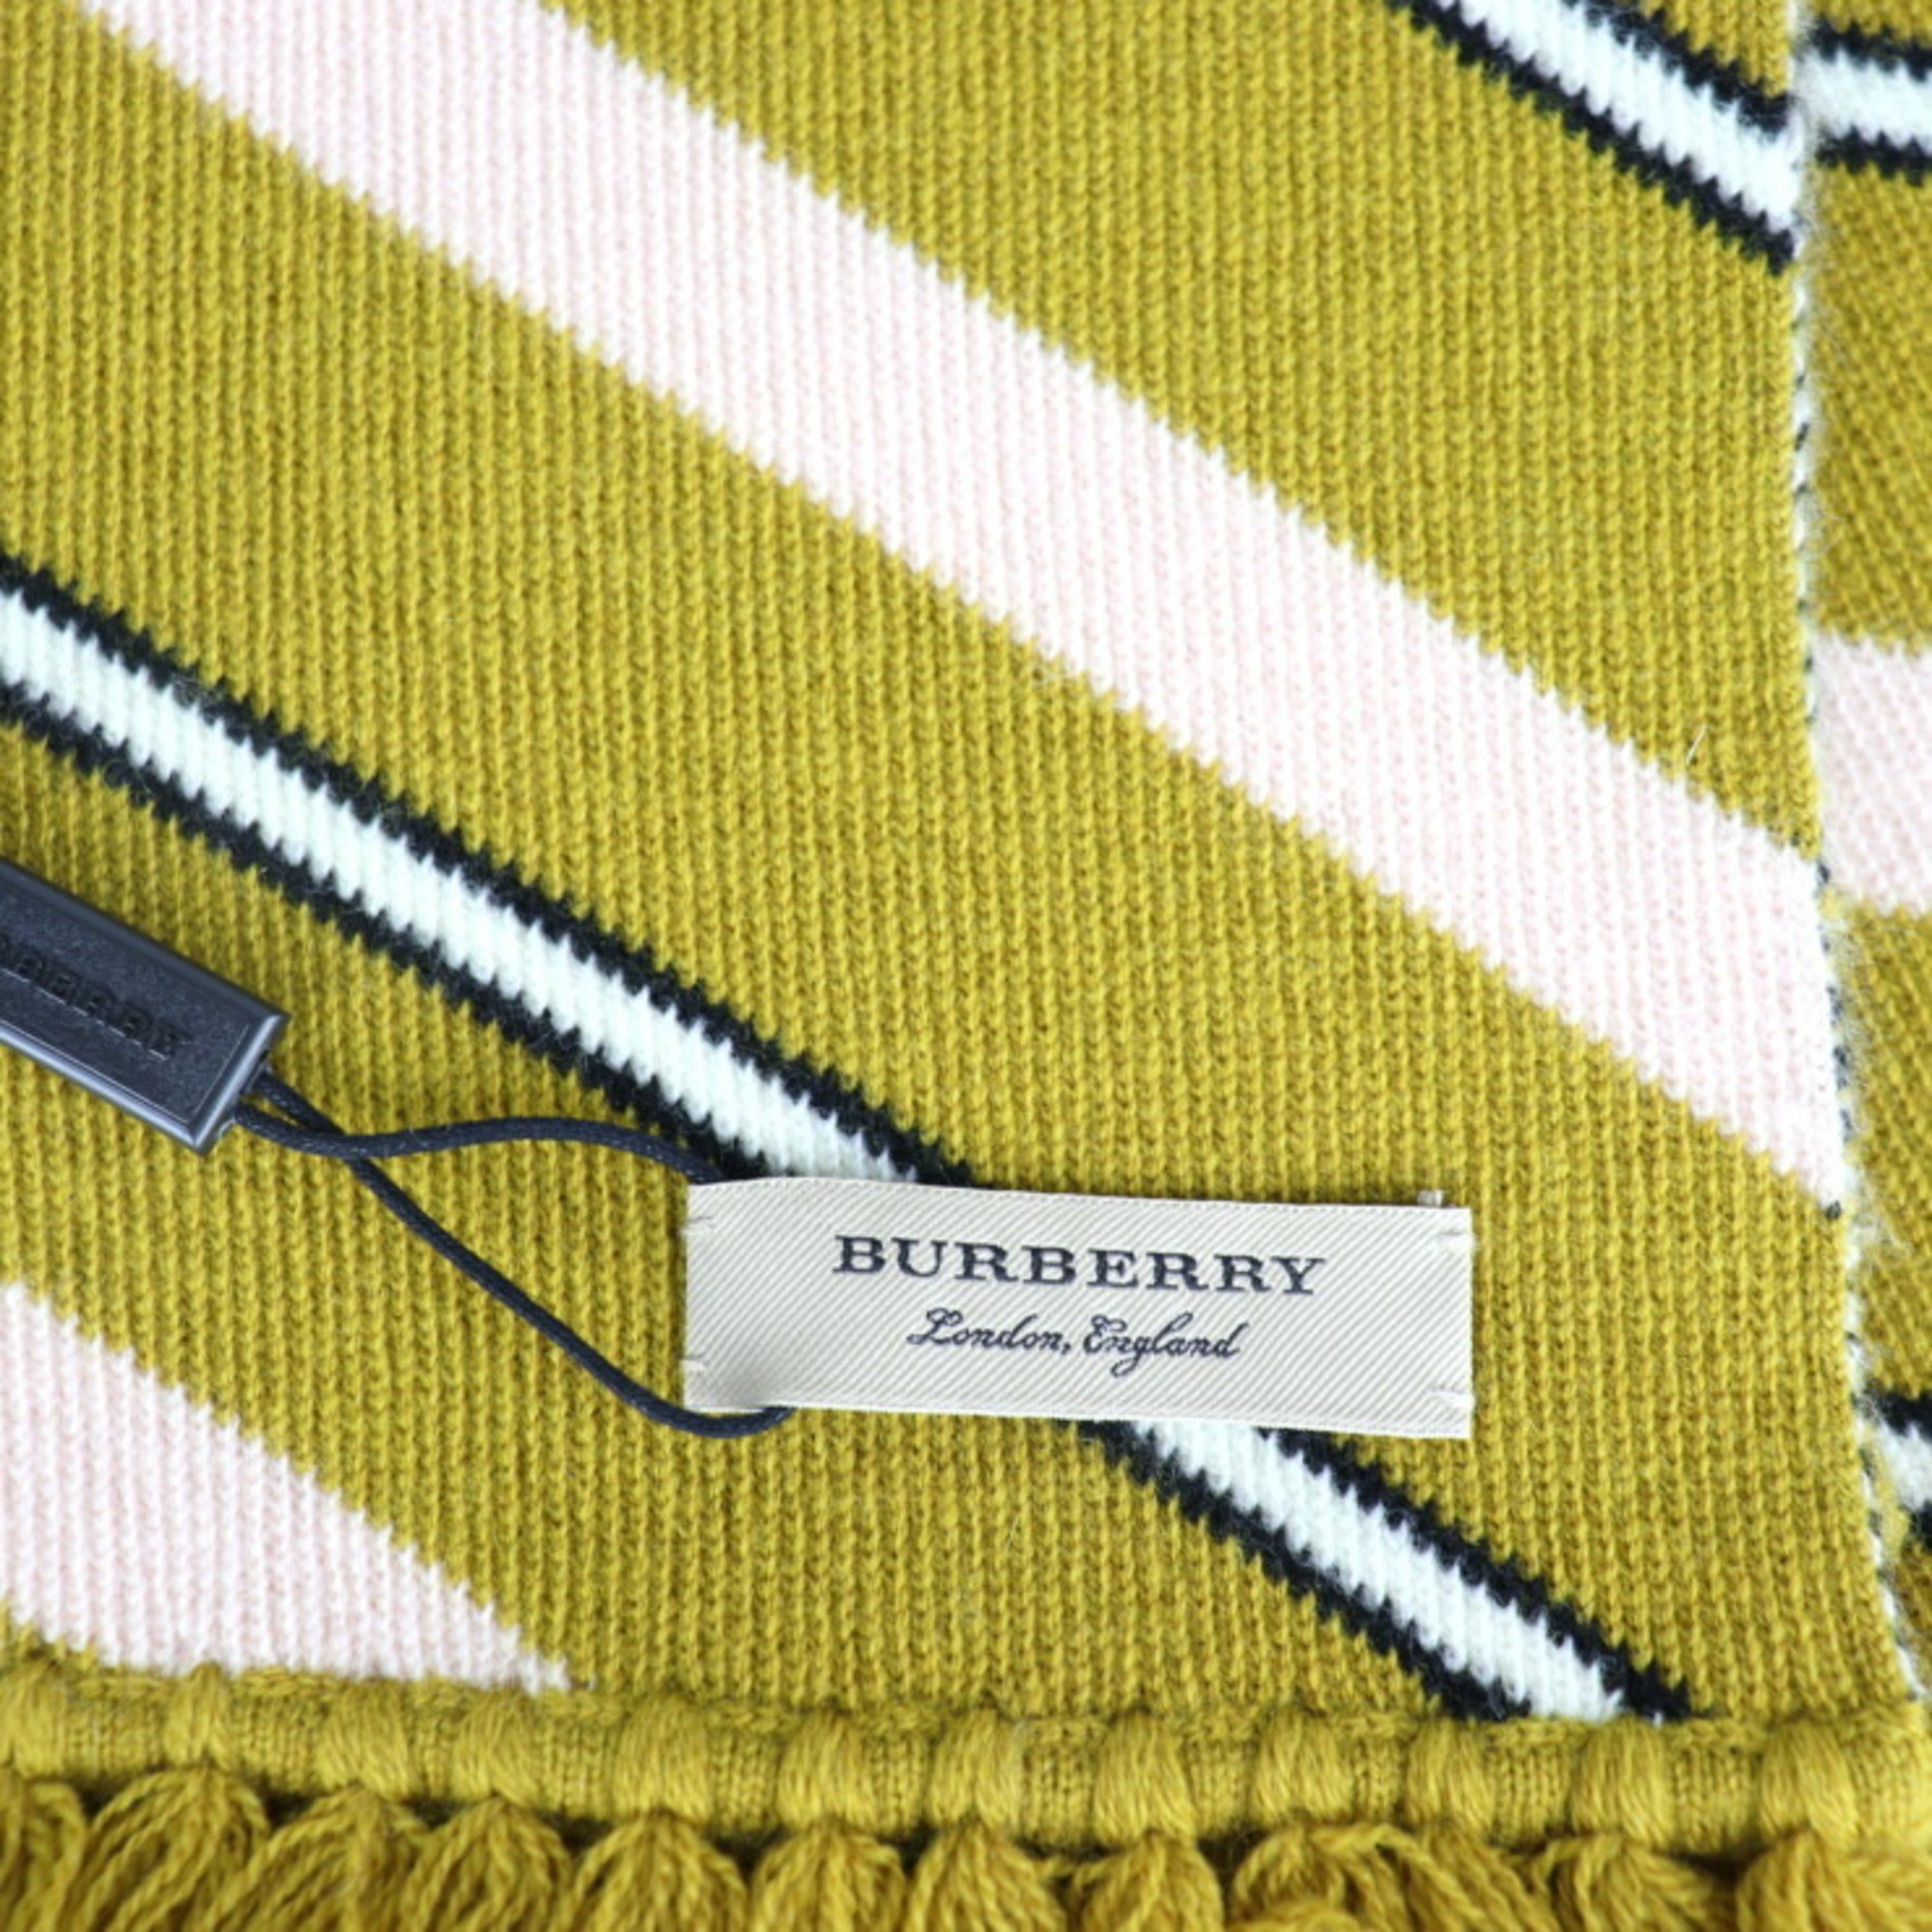 BURBERRY Burberry scarf 407535 wool cashmere mustard pink white stripe